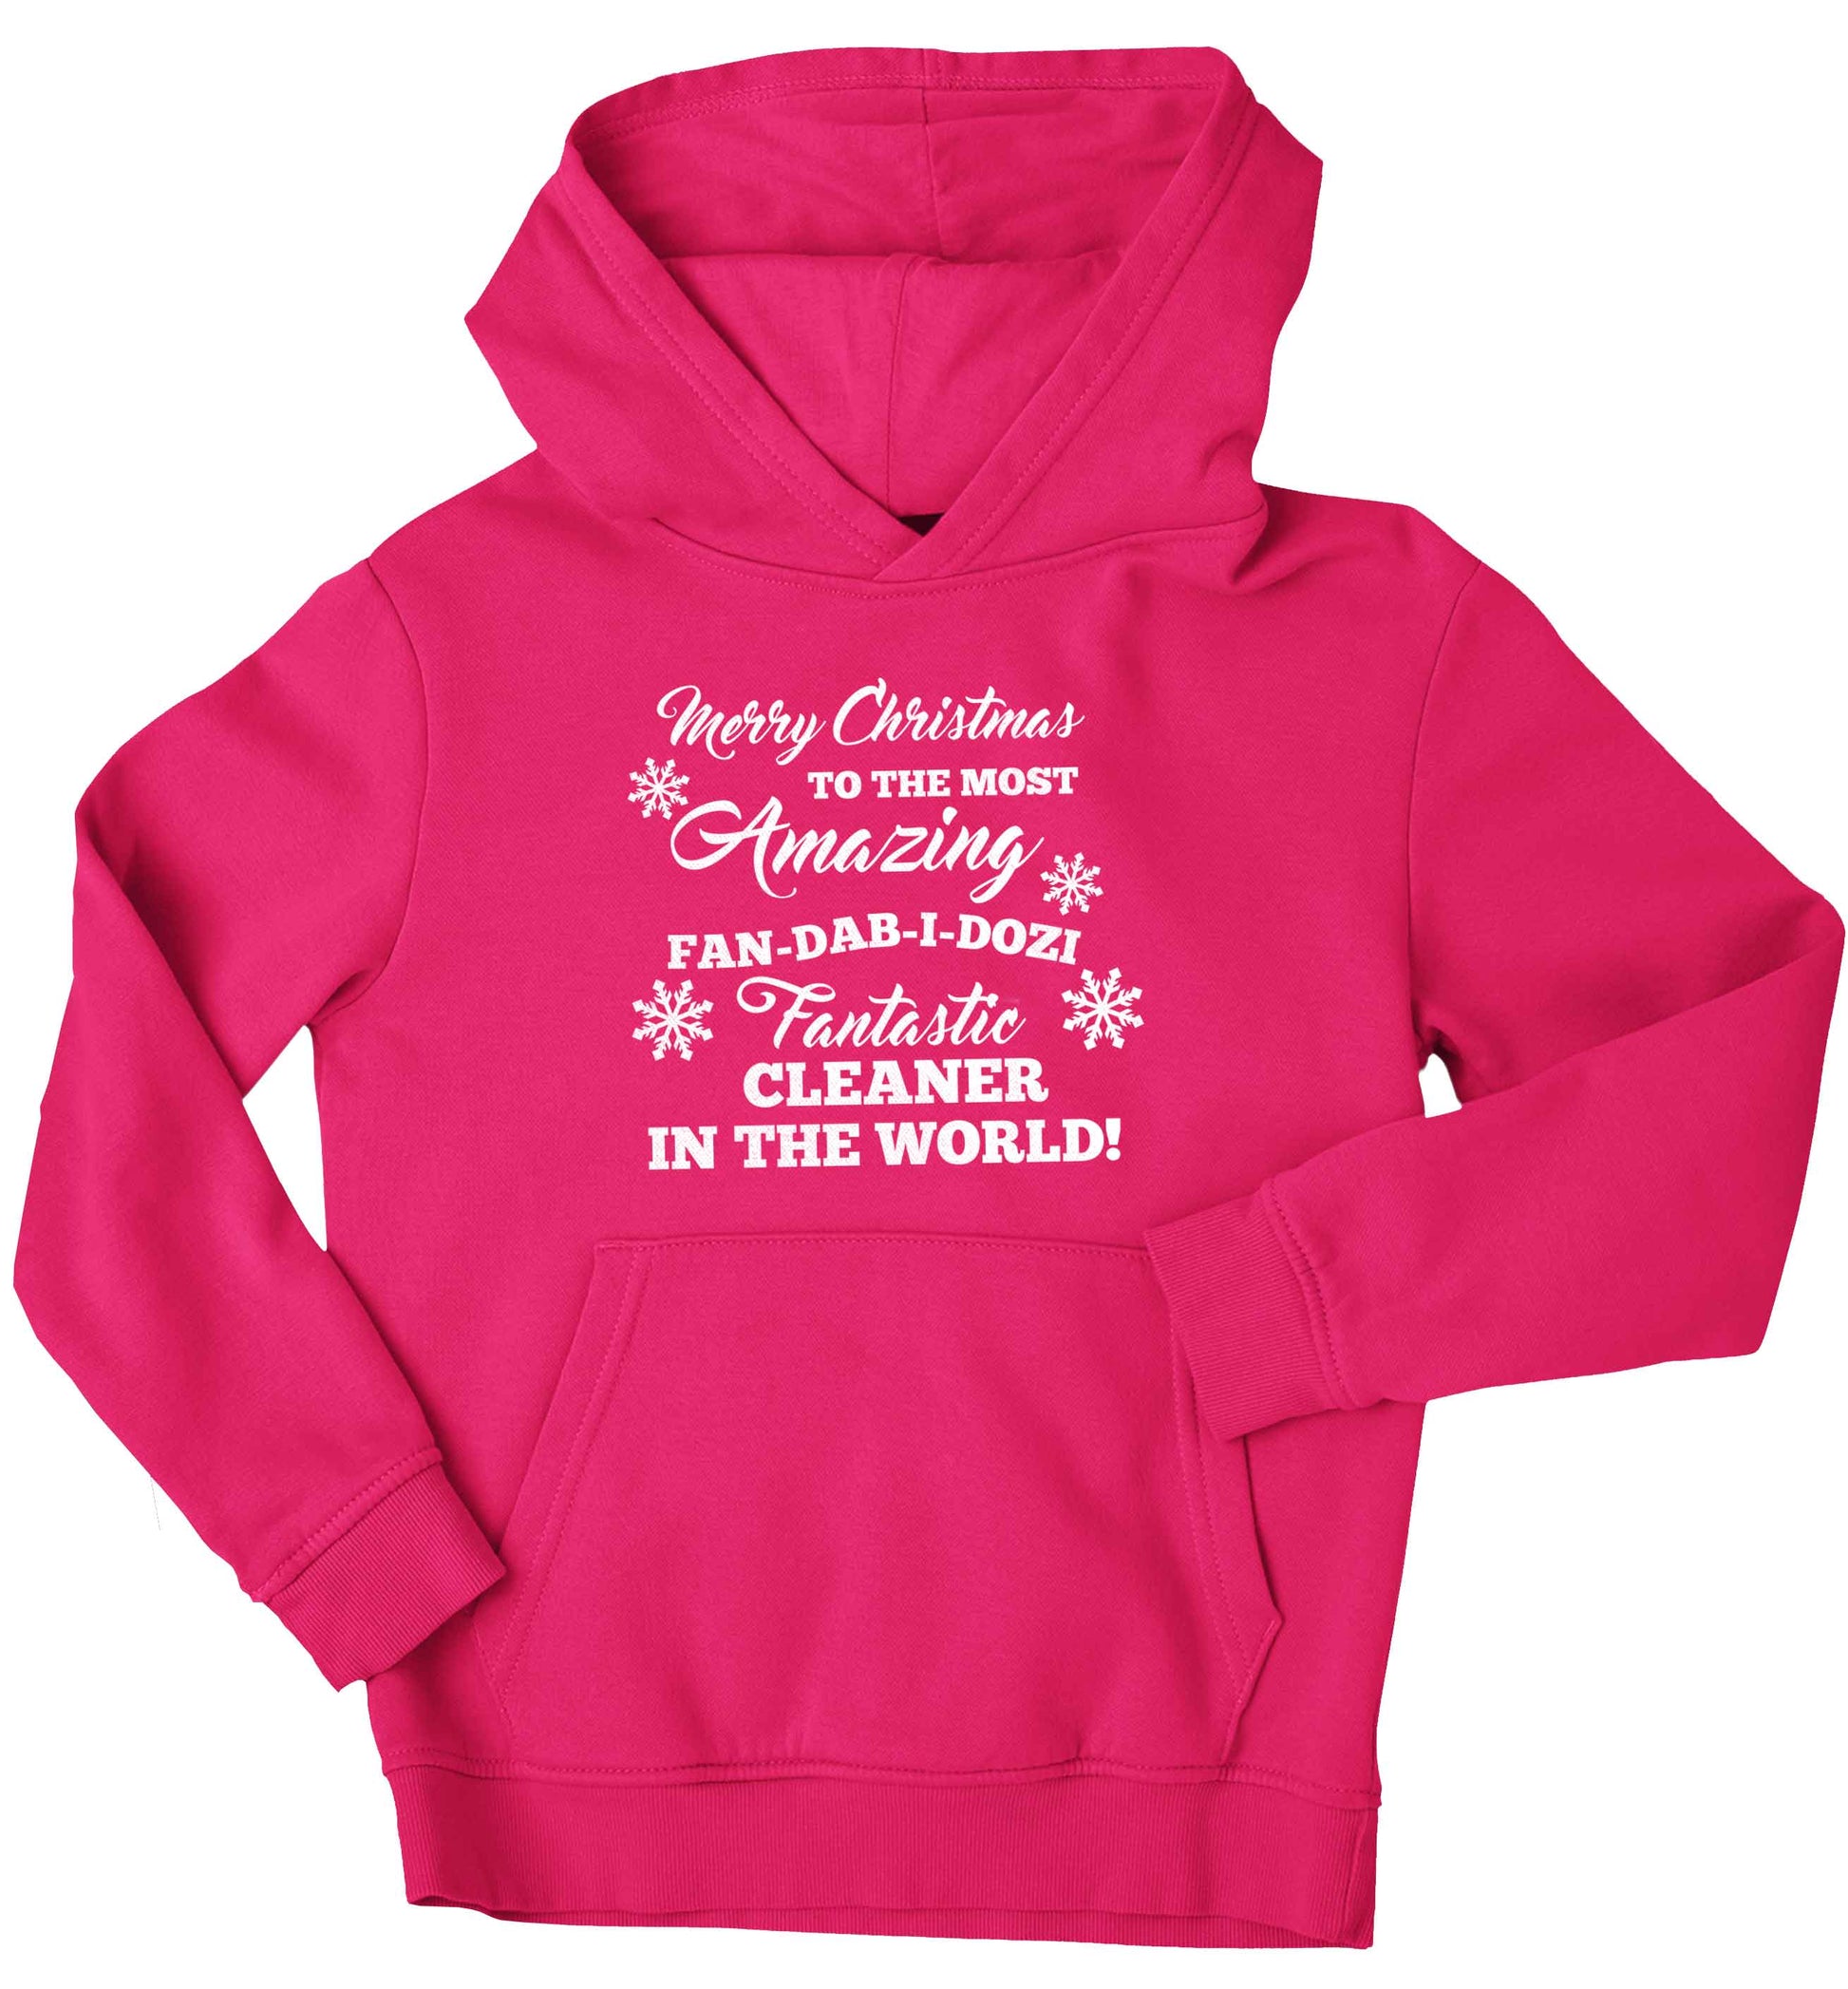 Merry Christmas to the most amazing fan-dab-i-dozi fantasic cleaner in the world children's pink hoodie 12-13 Years